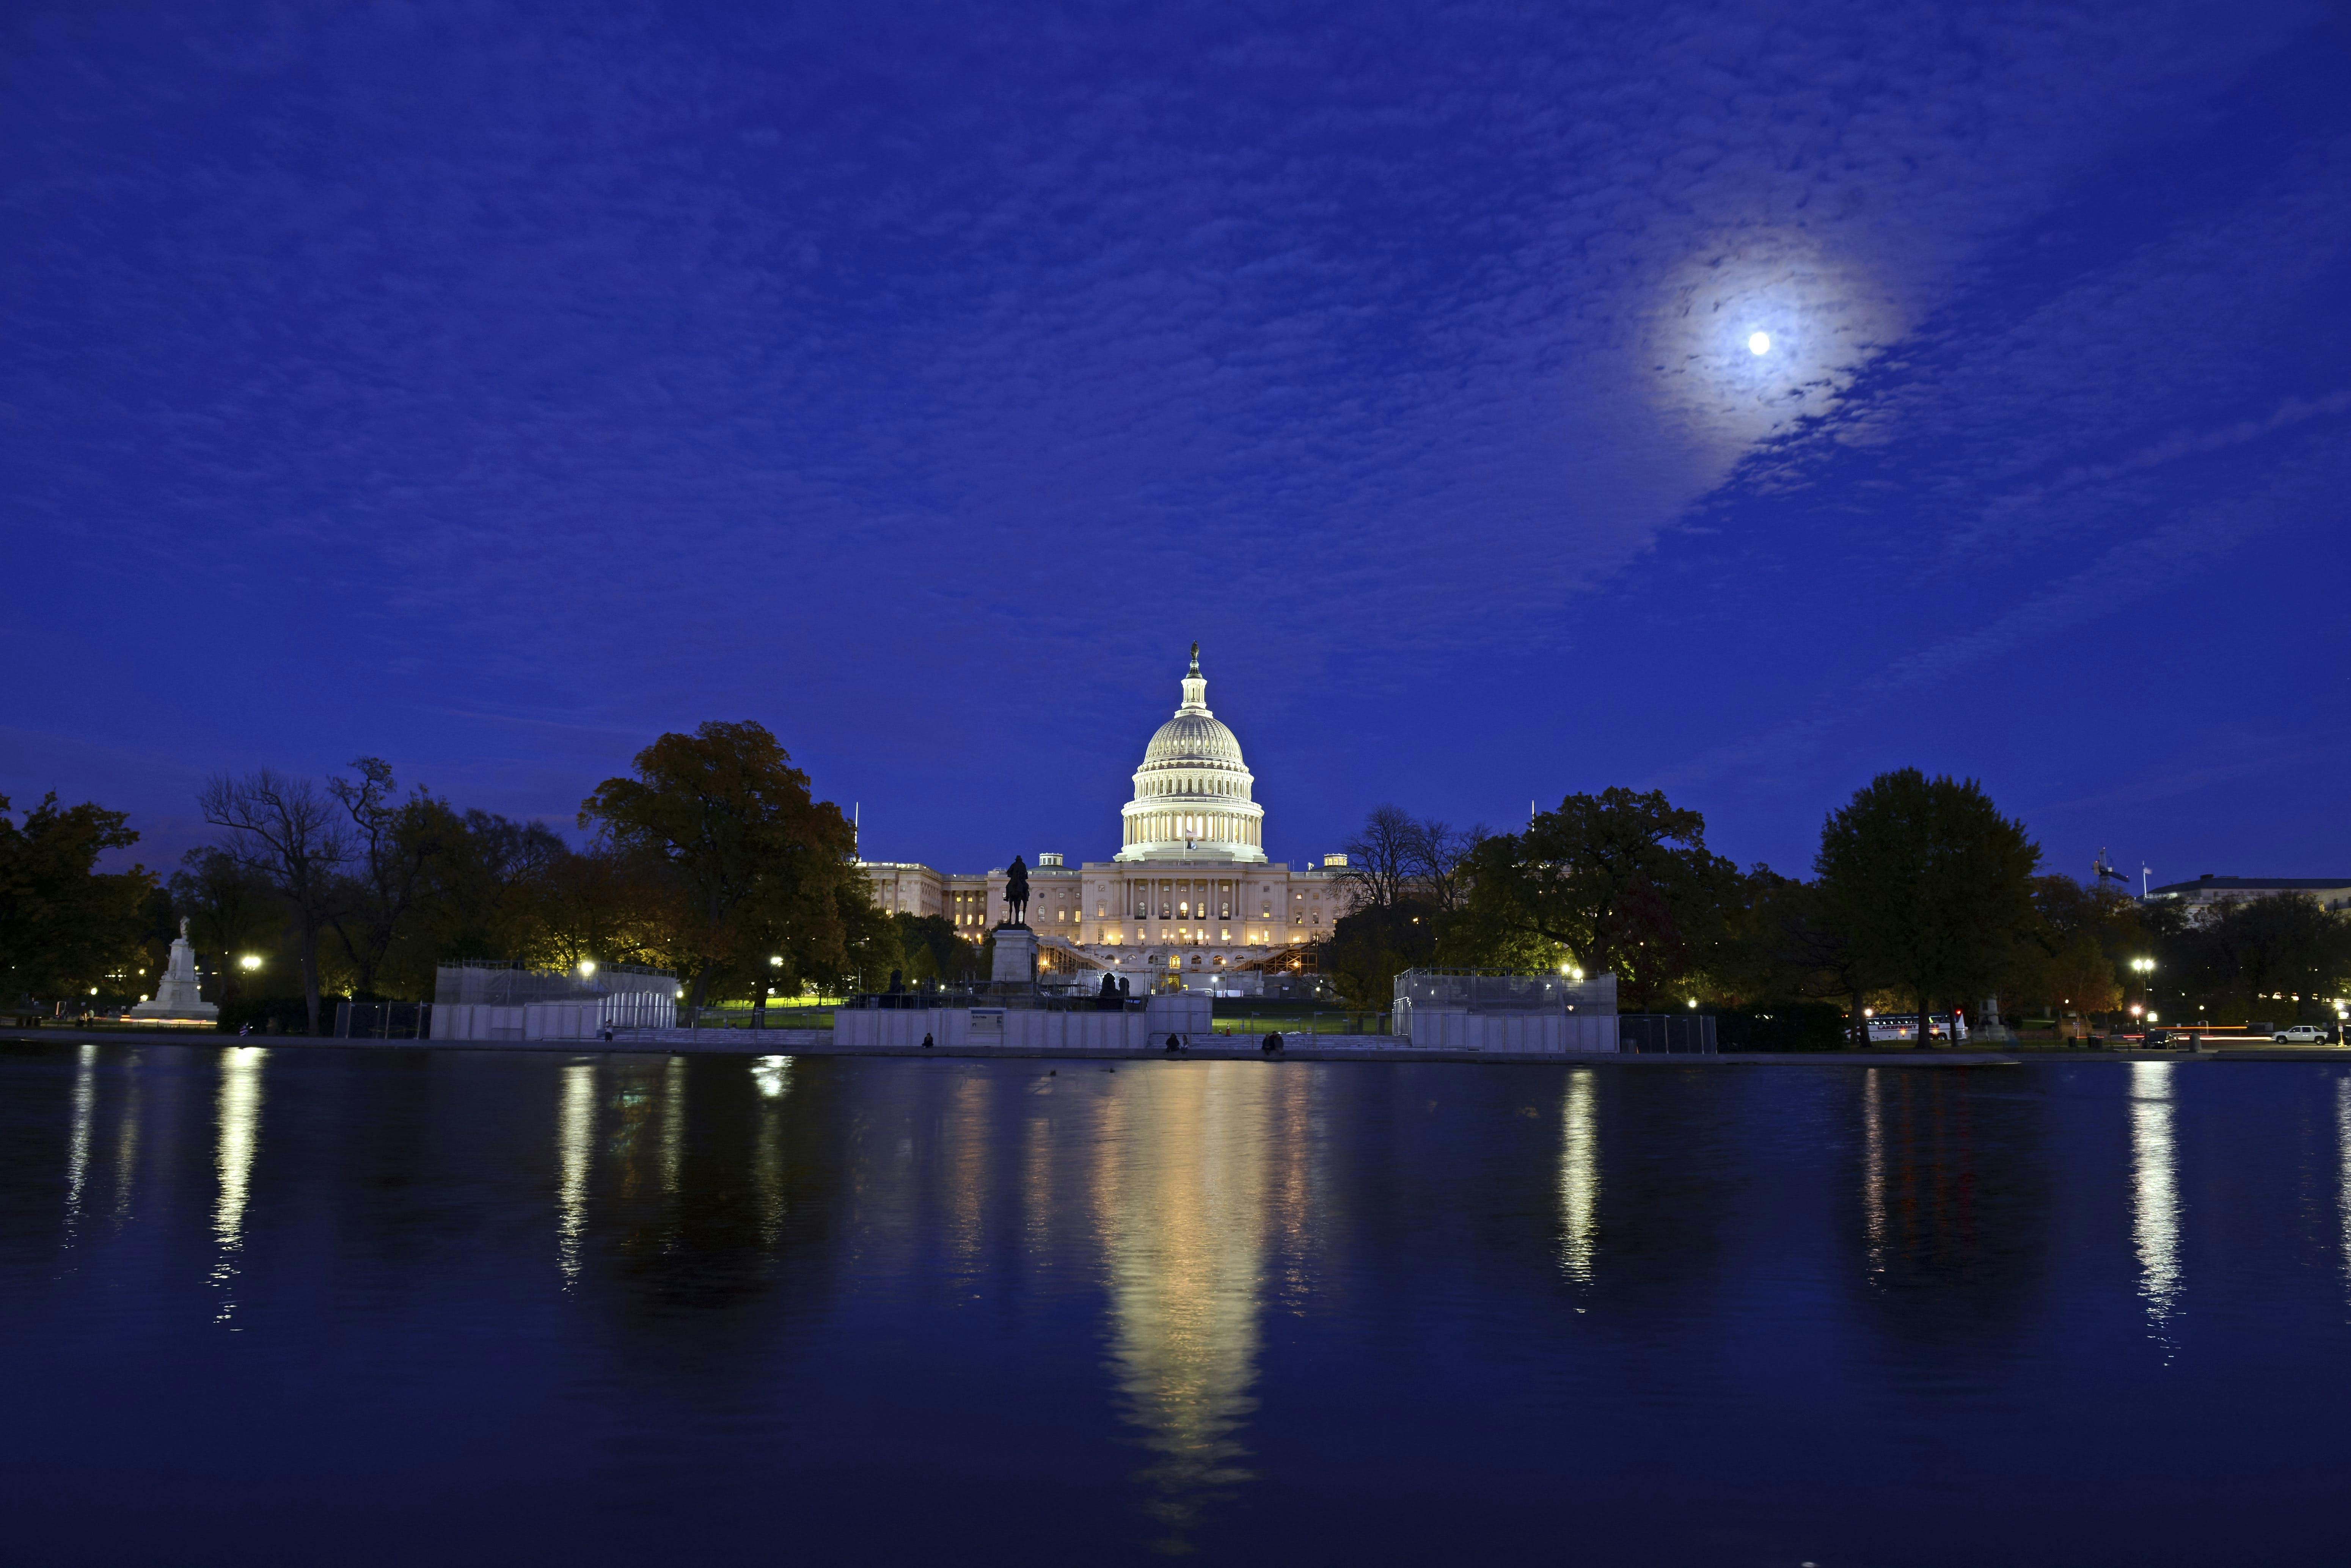 Tour of Washington's National Mall at night by electric car Musement